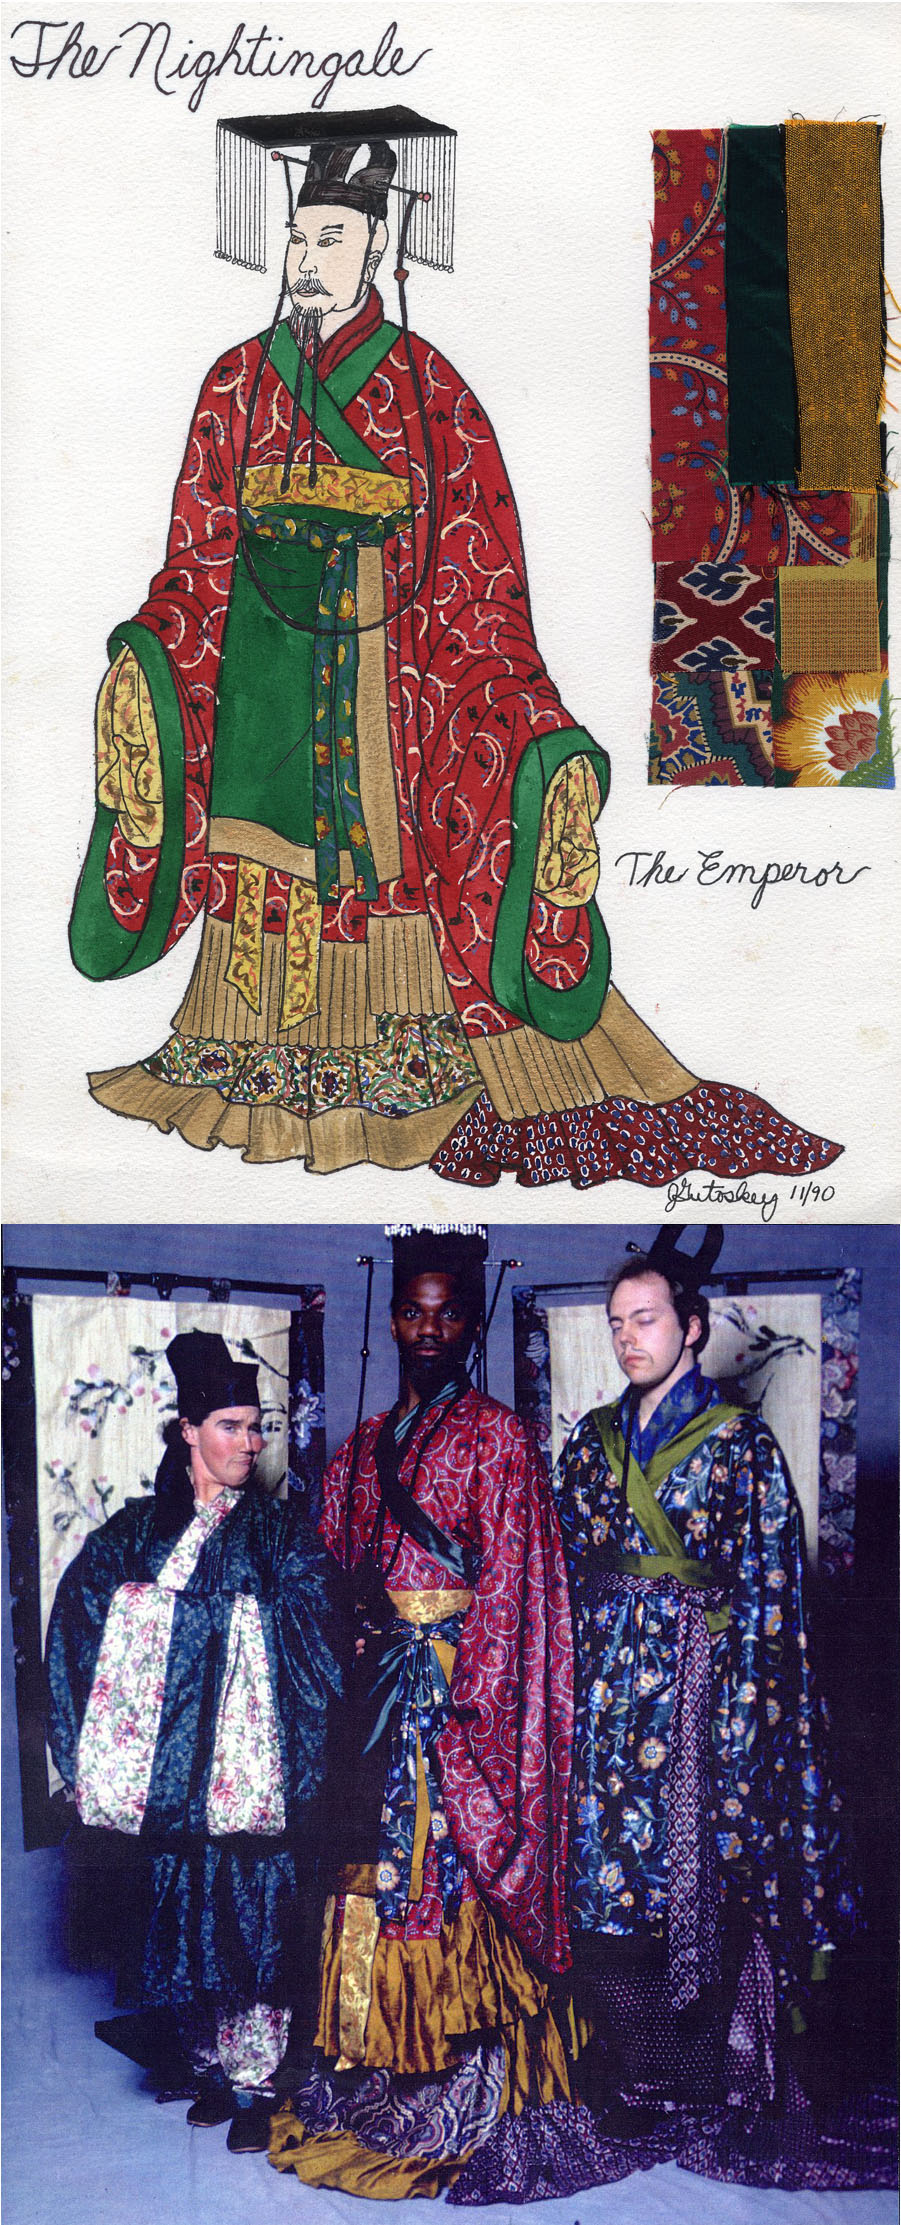 My costume designs and costume construction for \"The Nightingale\"  for Wild Swan Theater Ann Arbor, Michigan 1990.  